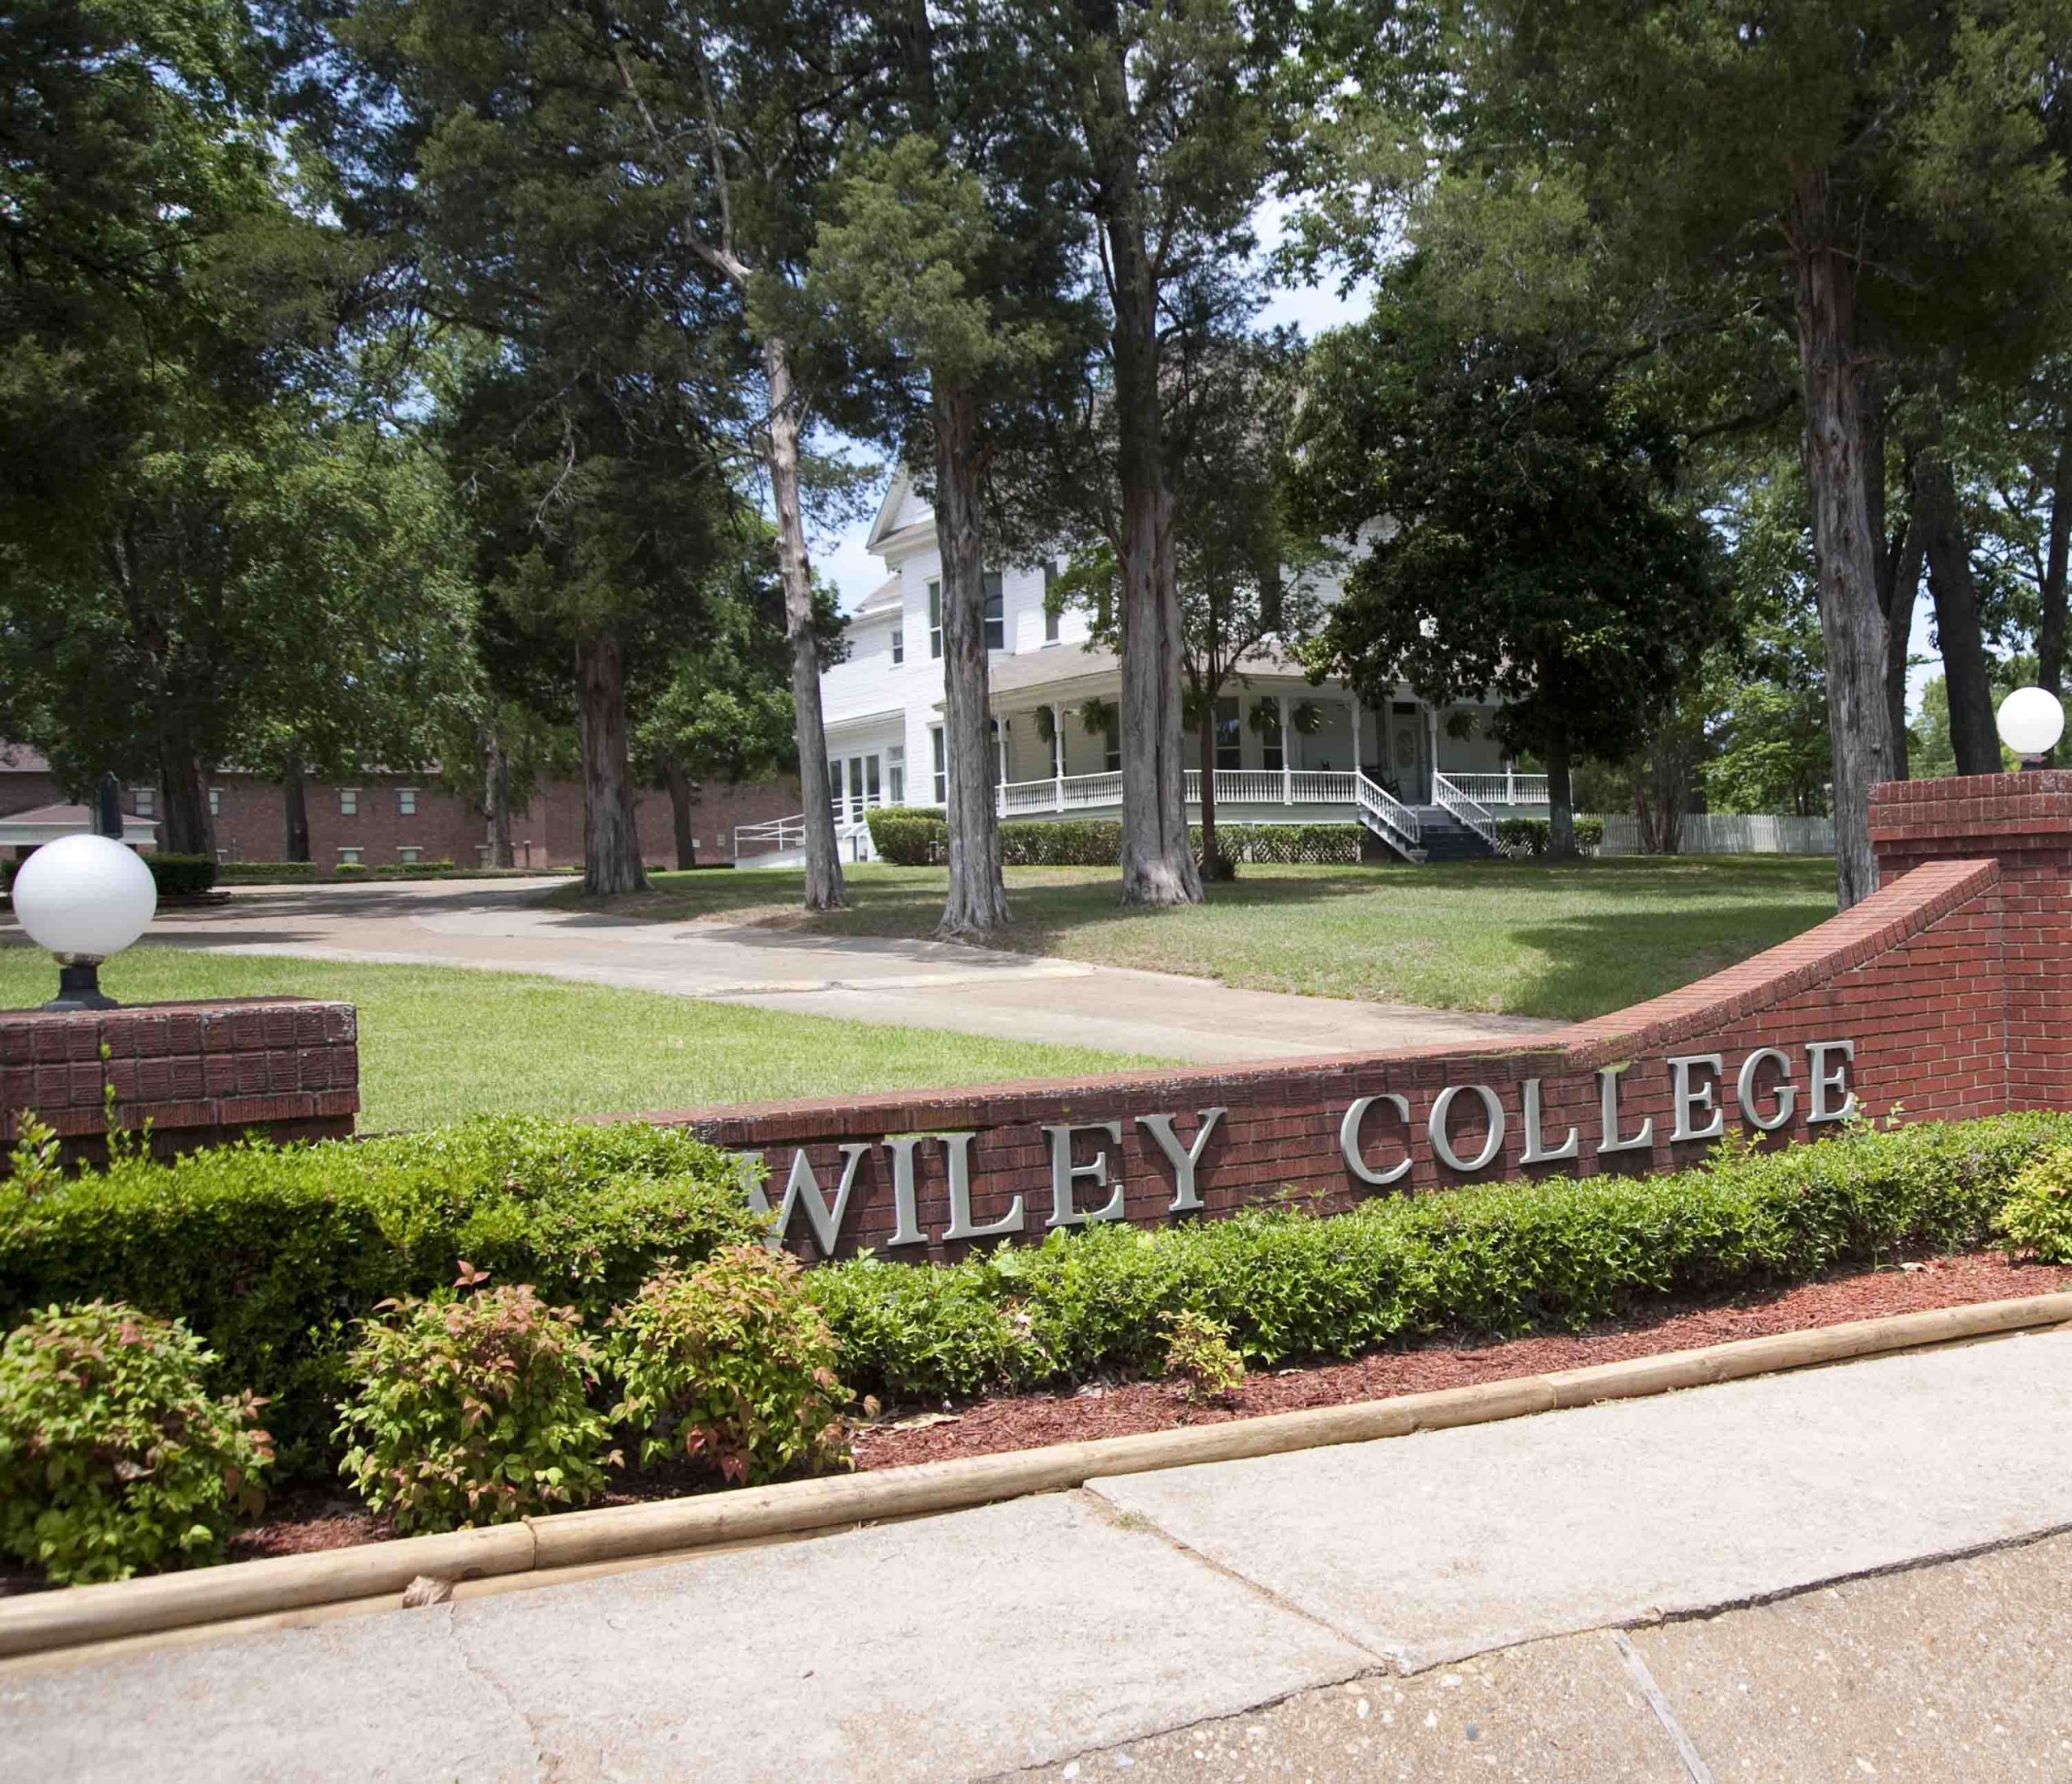 Wiley College